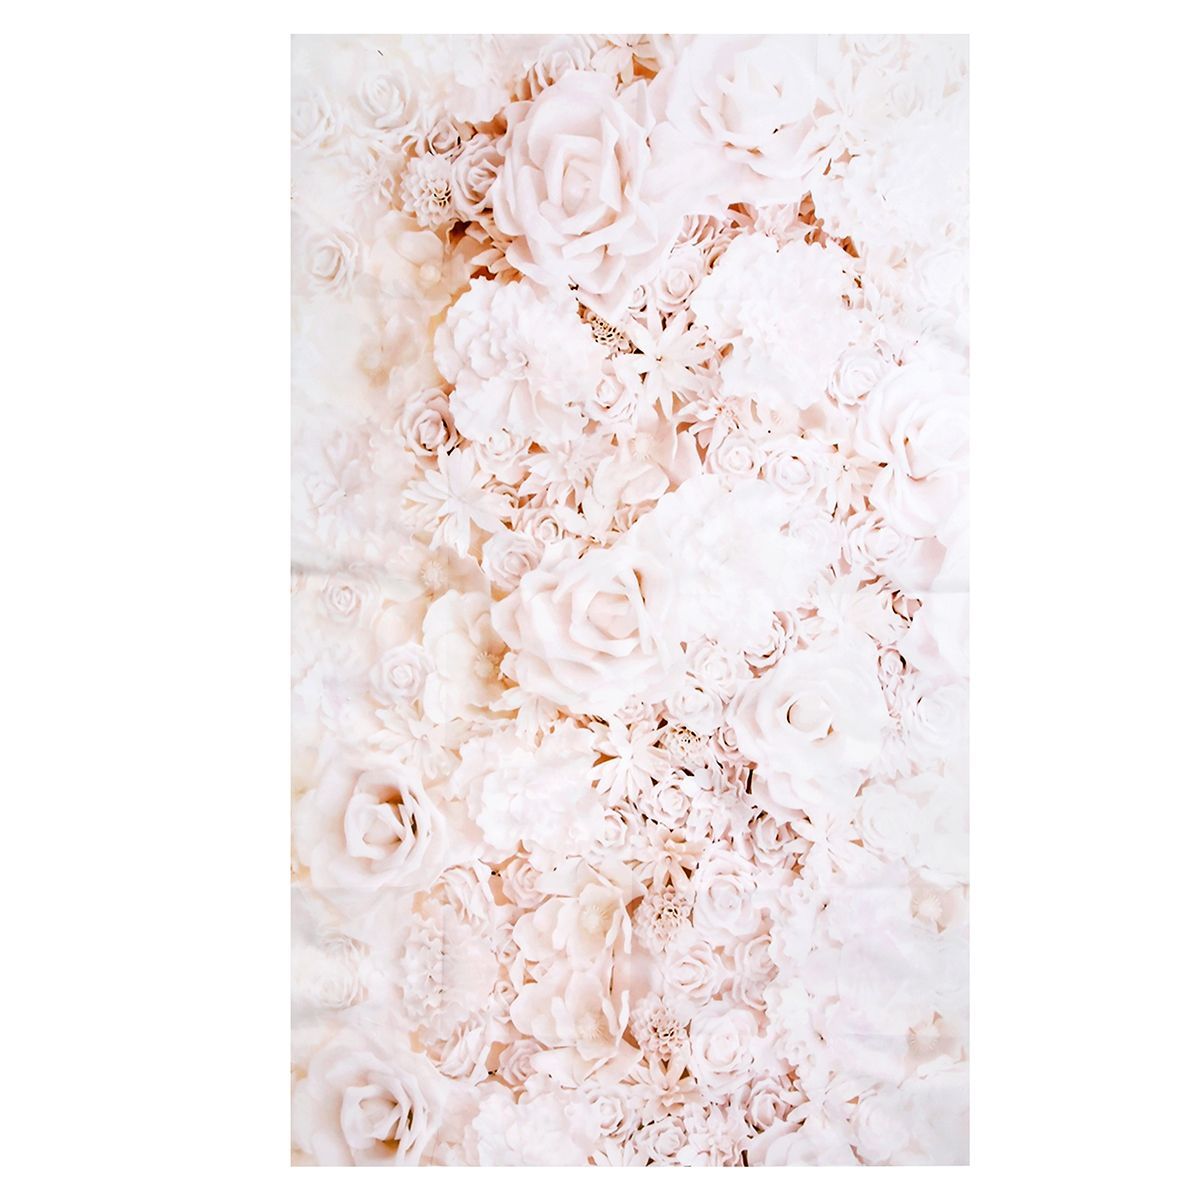 3x5FT-4x5FT--Wall-White-Rose-Flower-Vinyl-Photography-Background-Backdrop-Photo-Studio-Prop-1266440